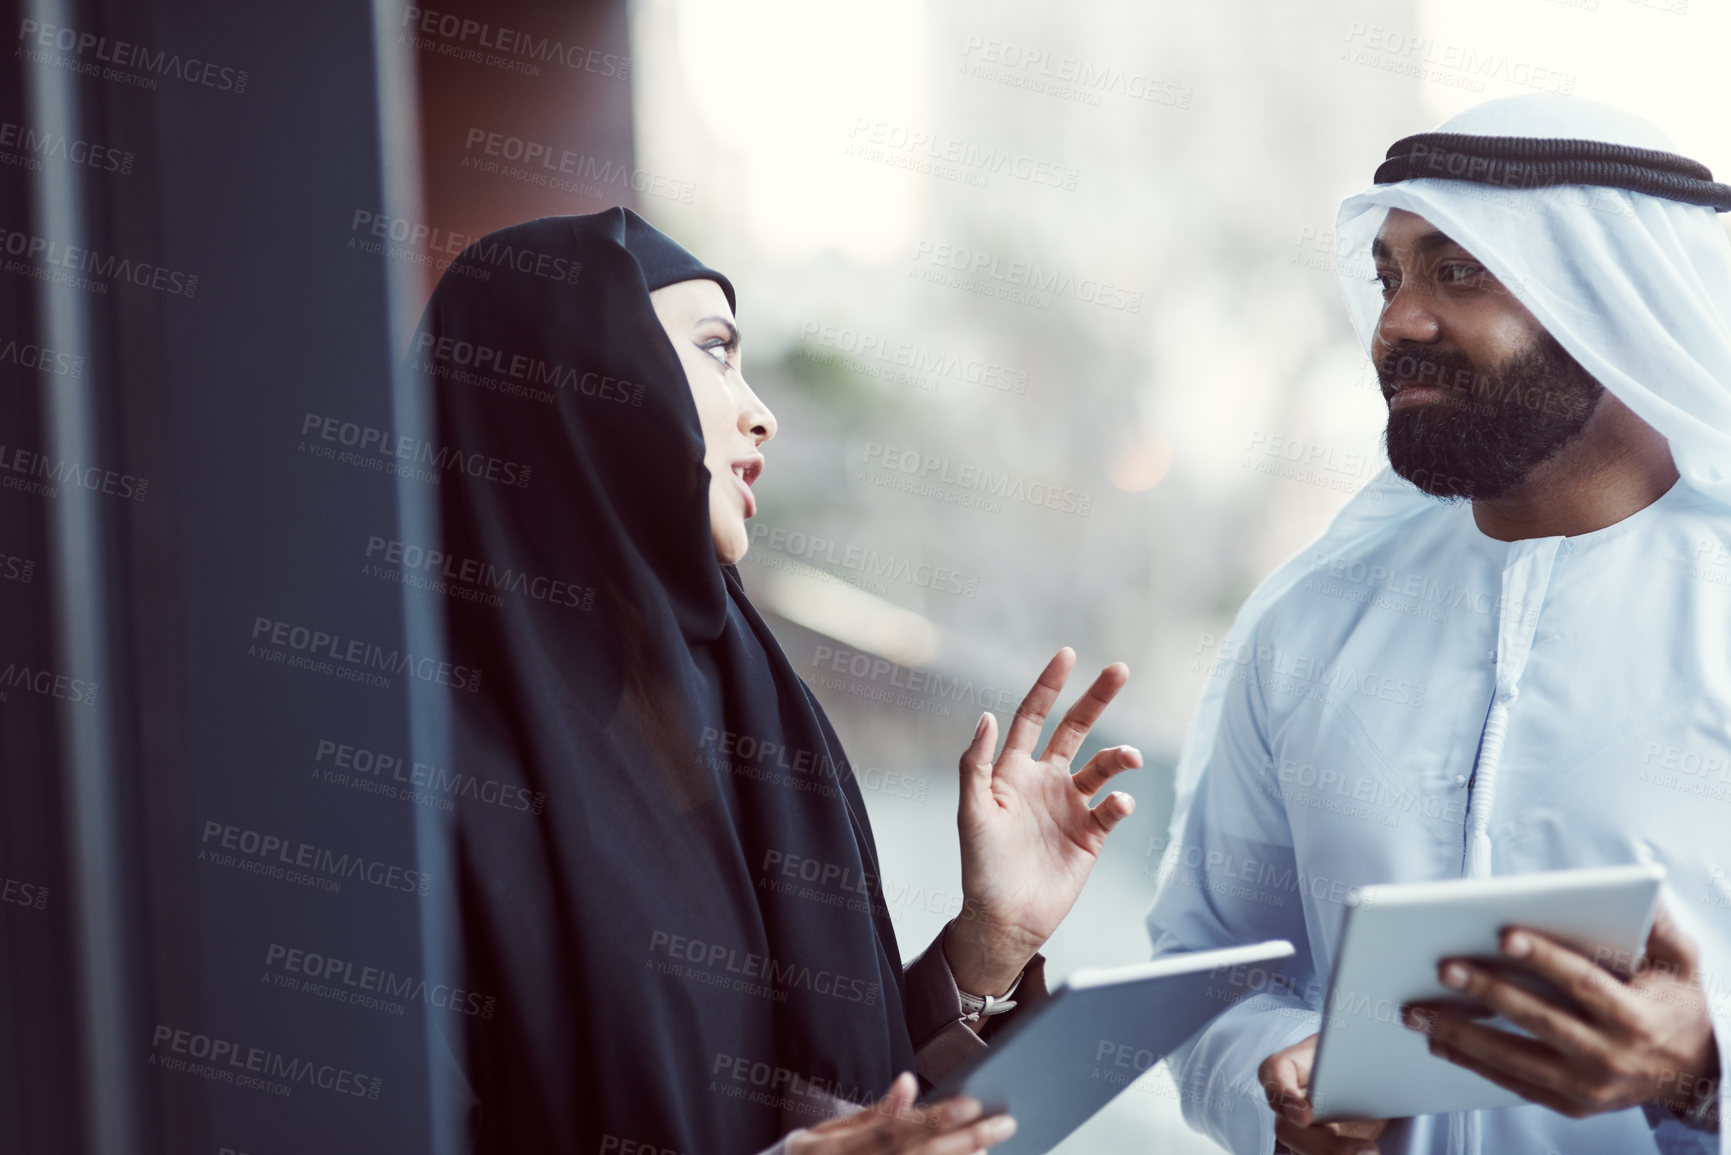 Buy stock photo Cropped shot of two arabic business colleagues working together outside on their office balcony